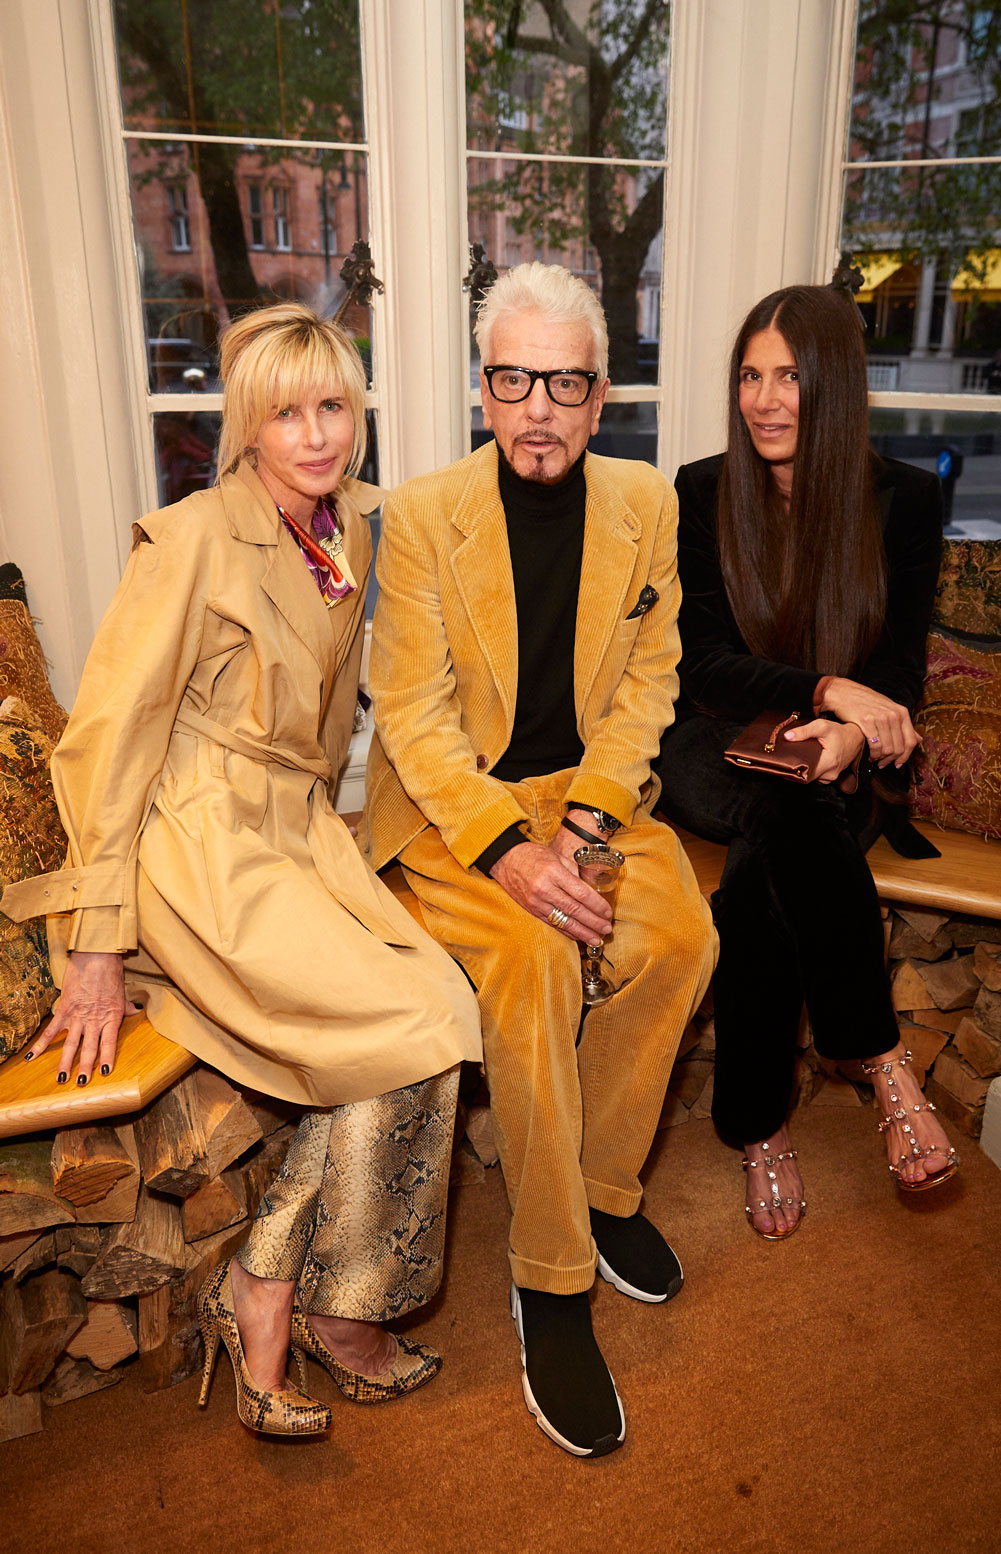 Brooke Metcalfe, Nicky Haslam and Elizabeth Saltzman at the Interiors launch at MATCHESFASHION.COM in London